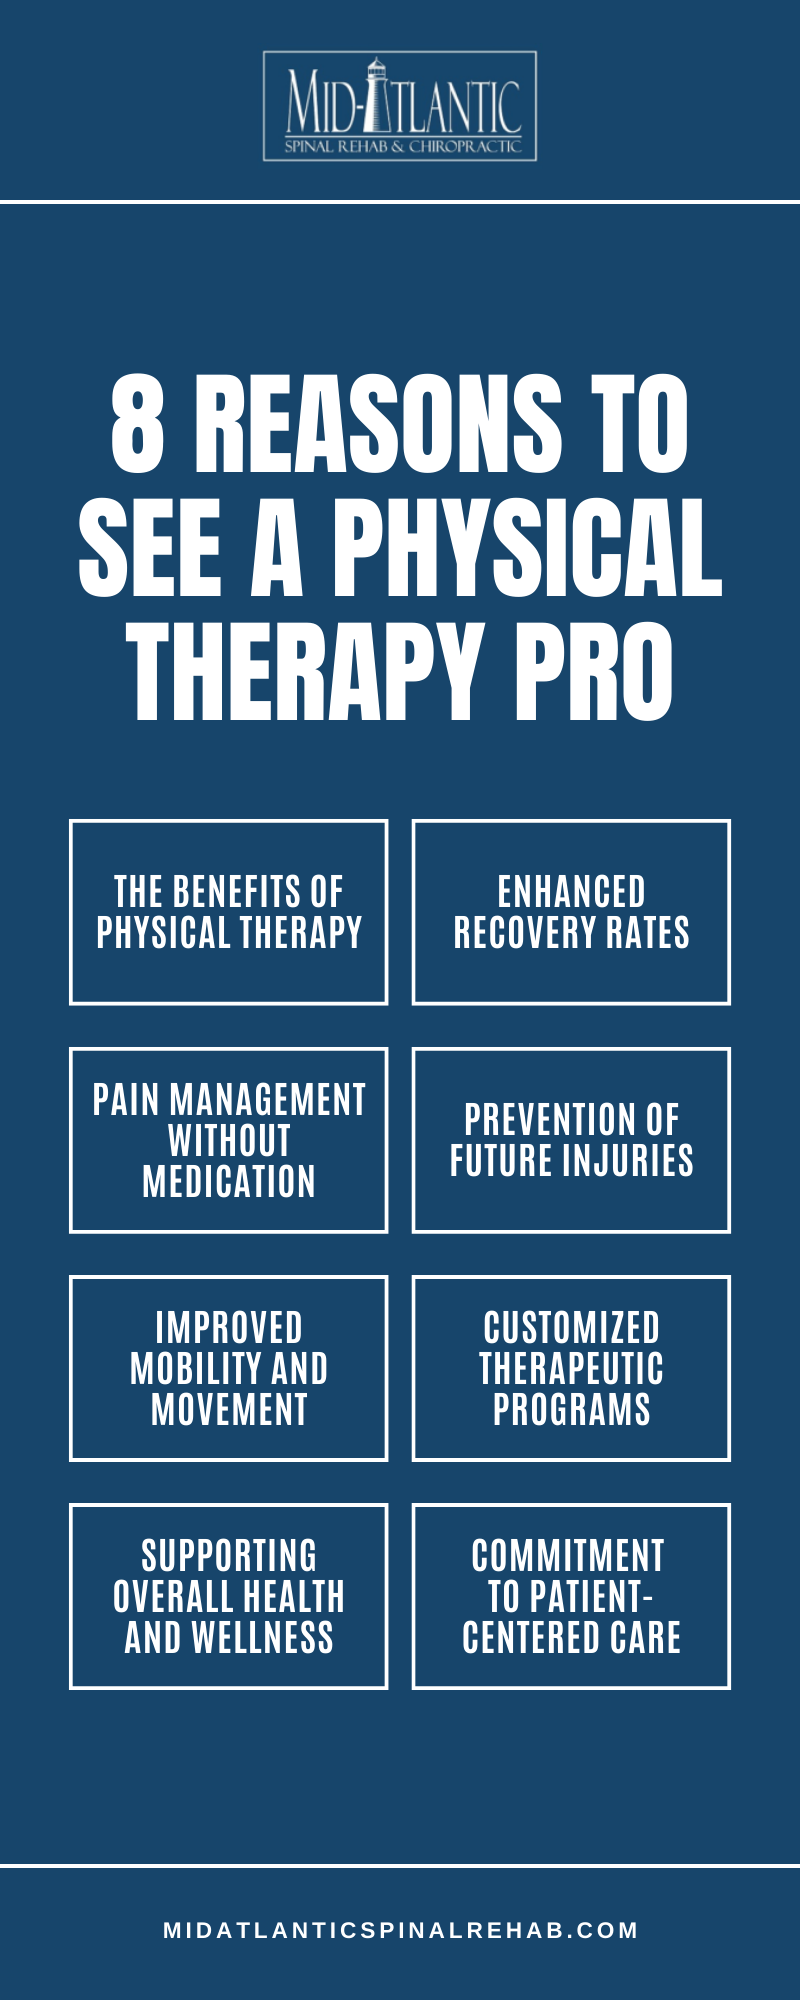 8 Reasons To See A Physical Therapy Pro Infographic